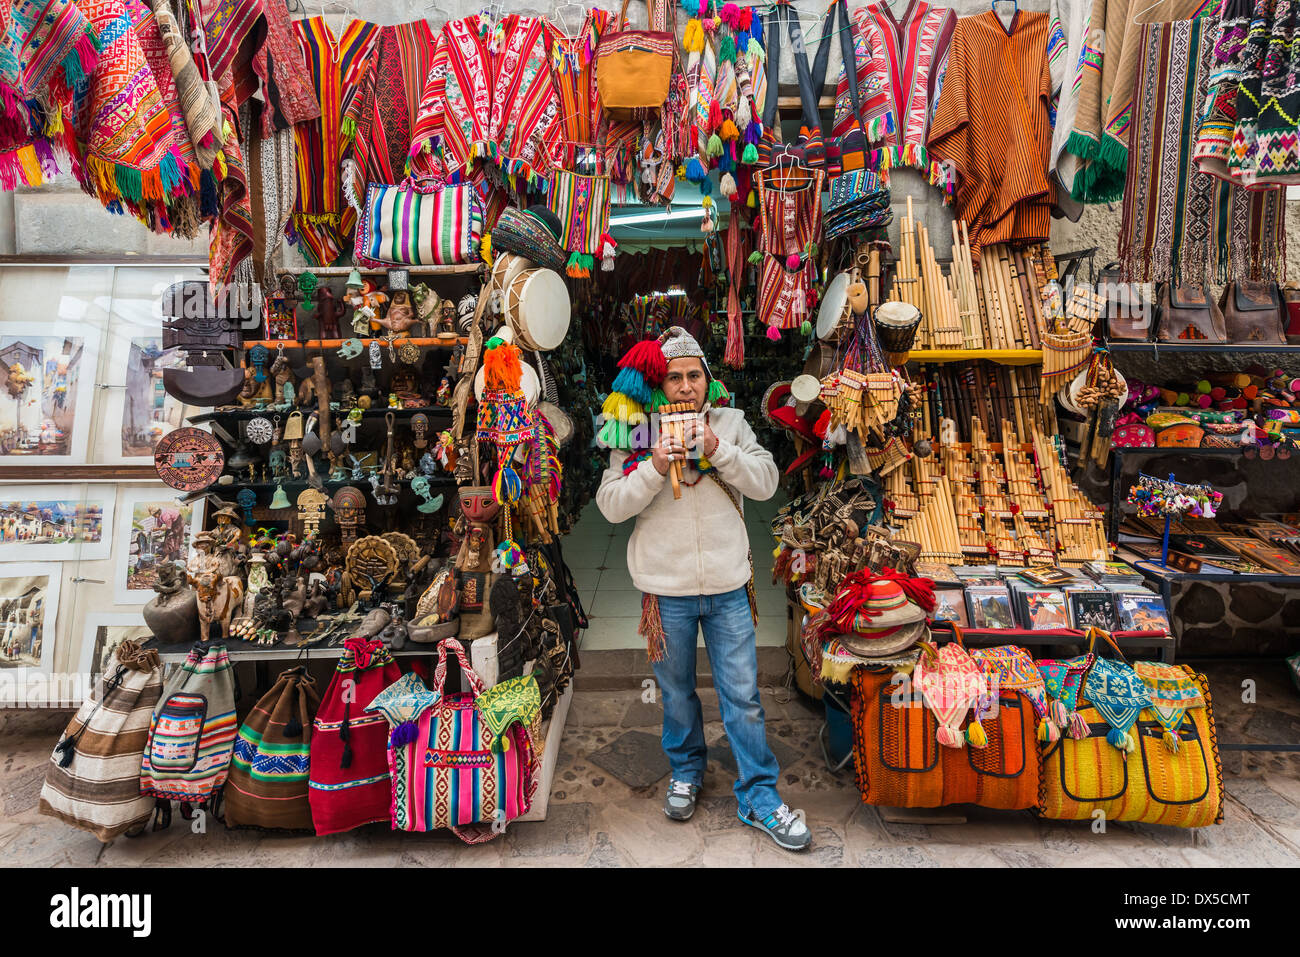 Pisac, Peru - July 14, 2013: man playing pan flute at Pisac market in the peruvian Andes at Cuzco Peru on july 14th, 2013 Stock Photo